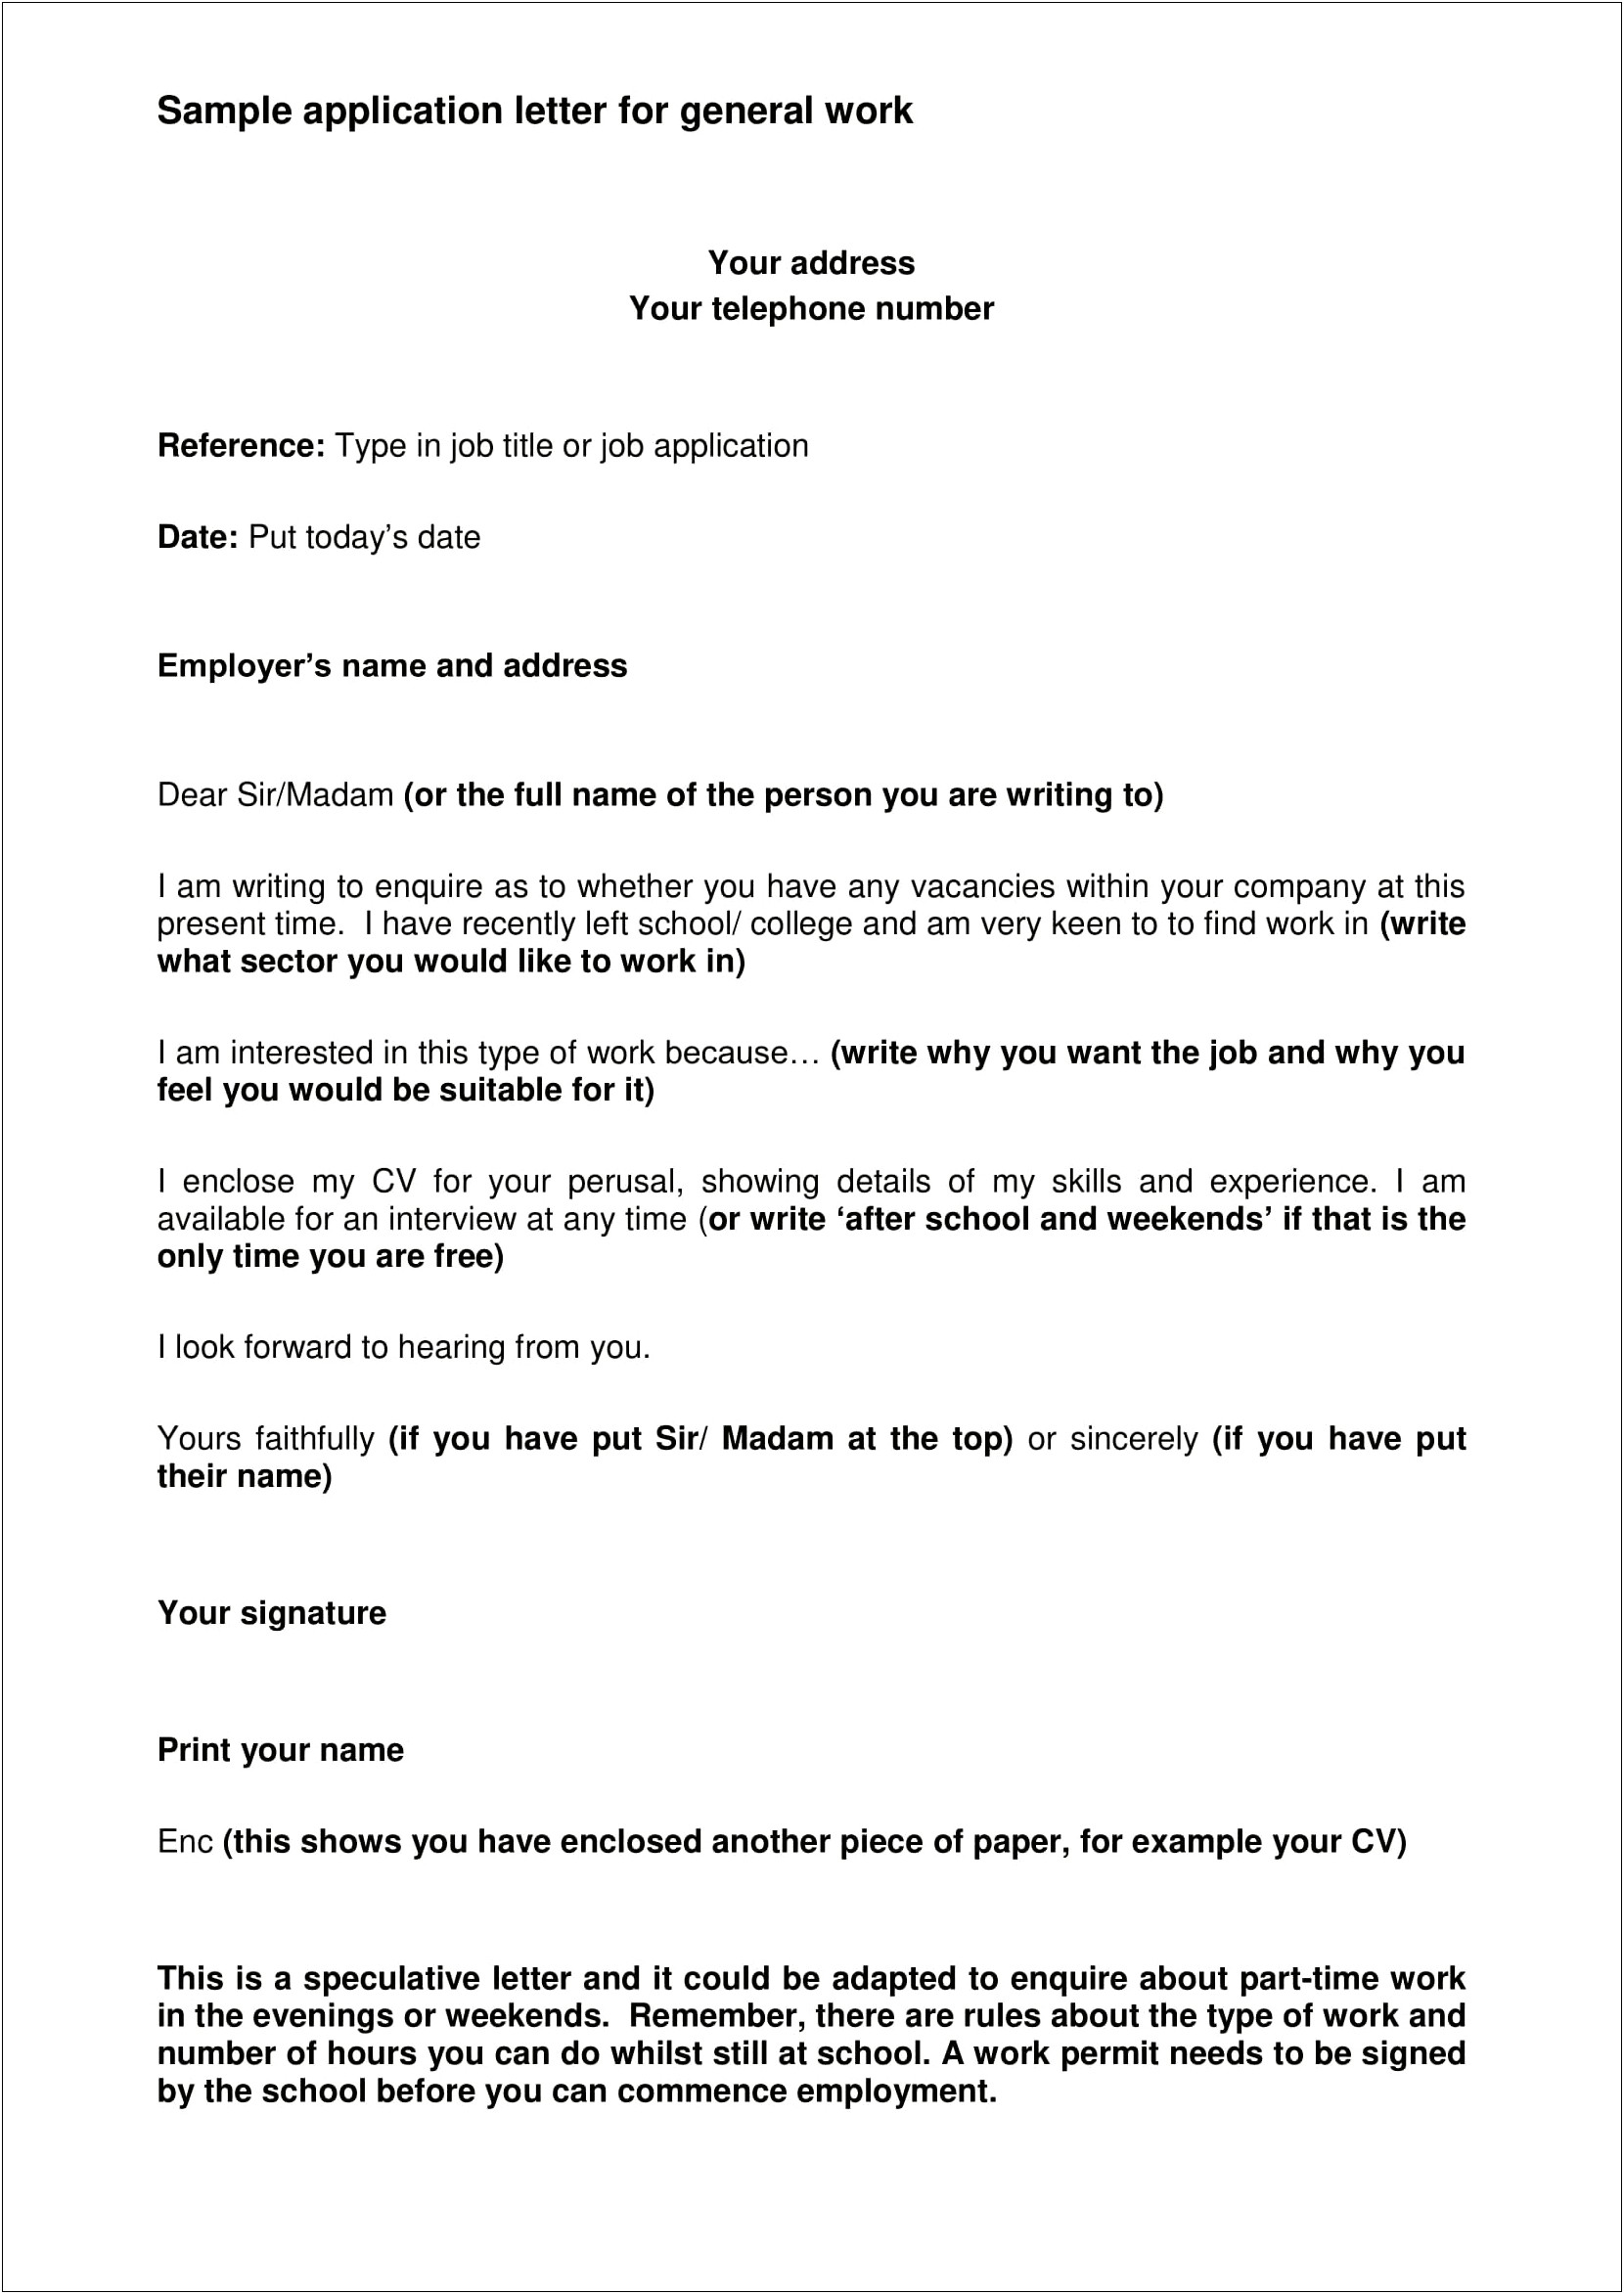 Resume And Cover Letter Guide Pdf